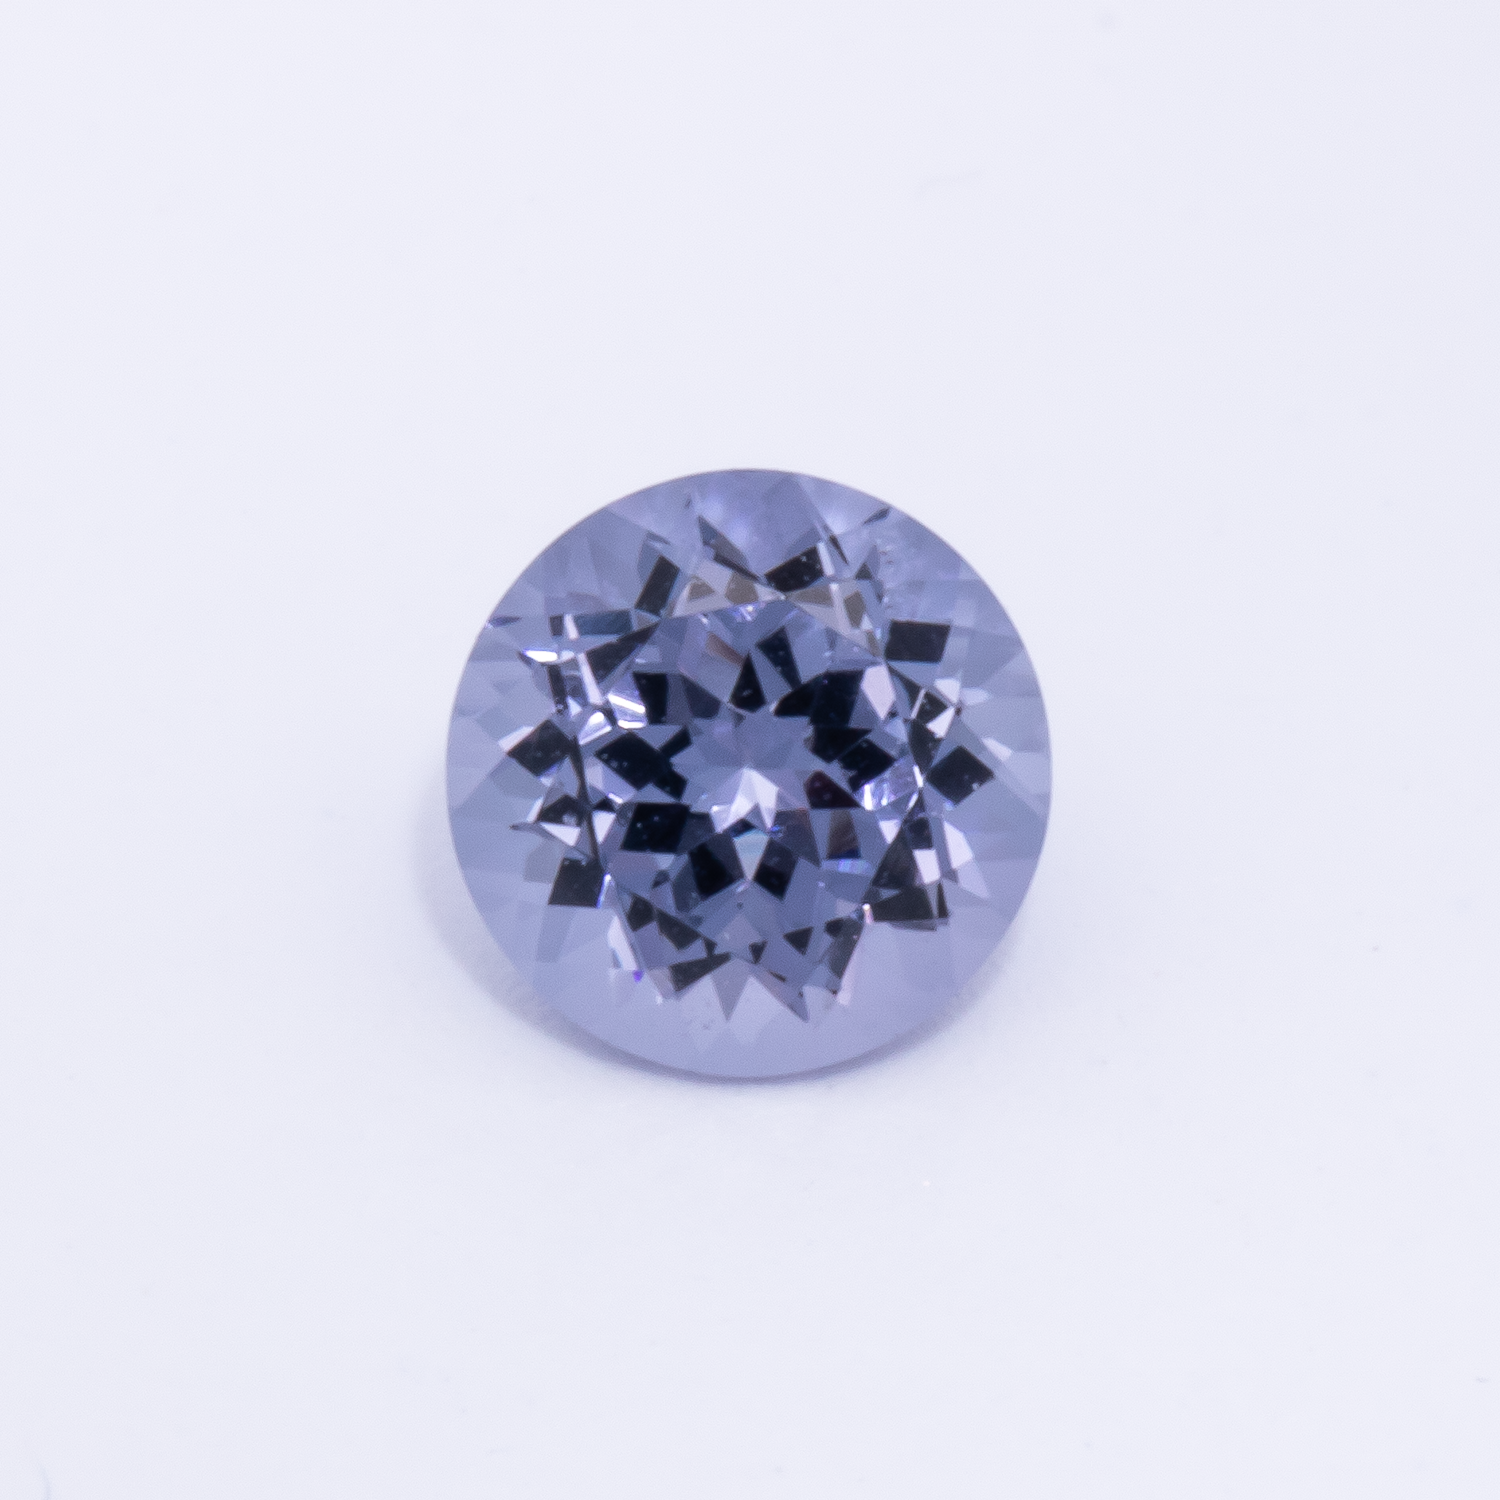 Spinell - lila, rund, 5x5 mm, 0.44 cts, Nr. SP90059